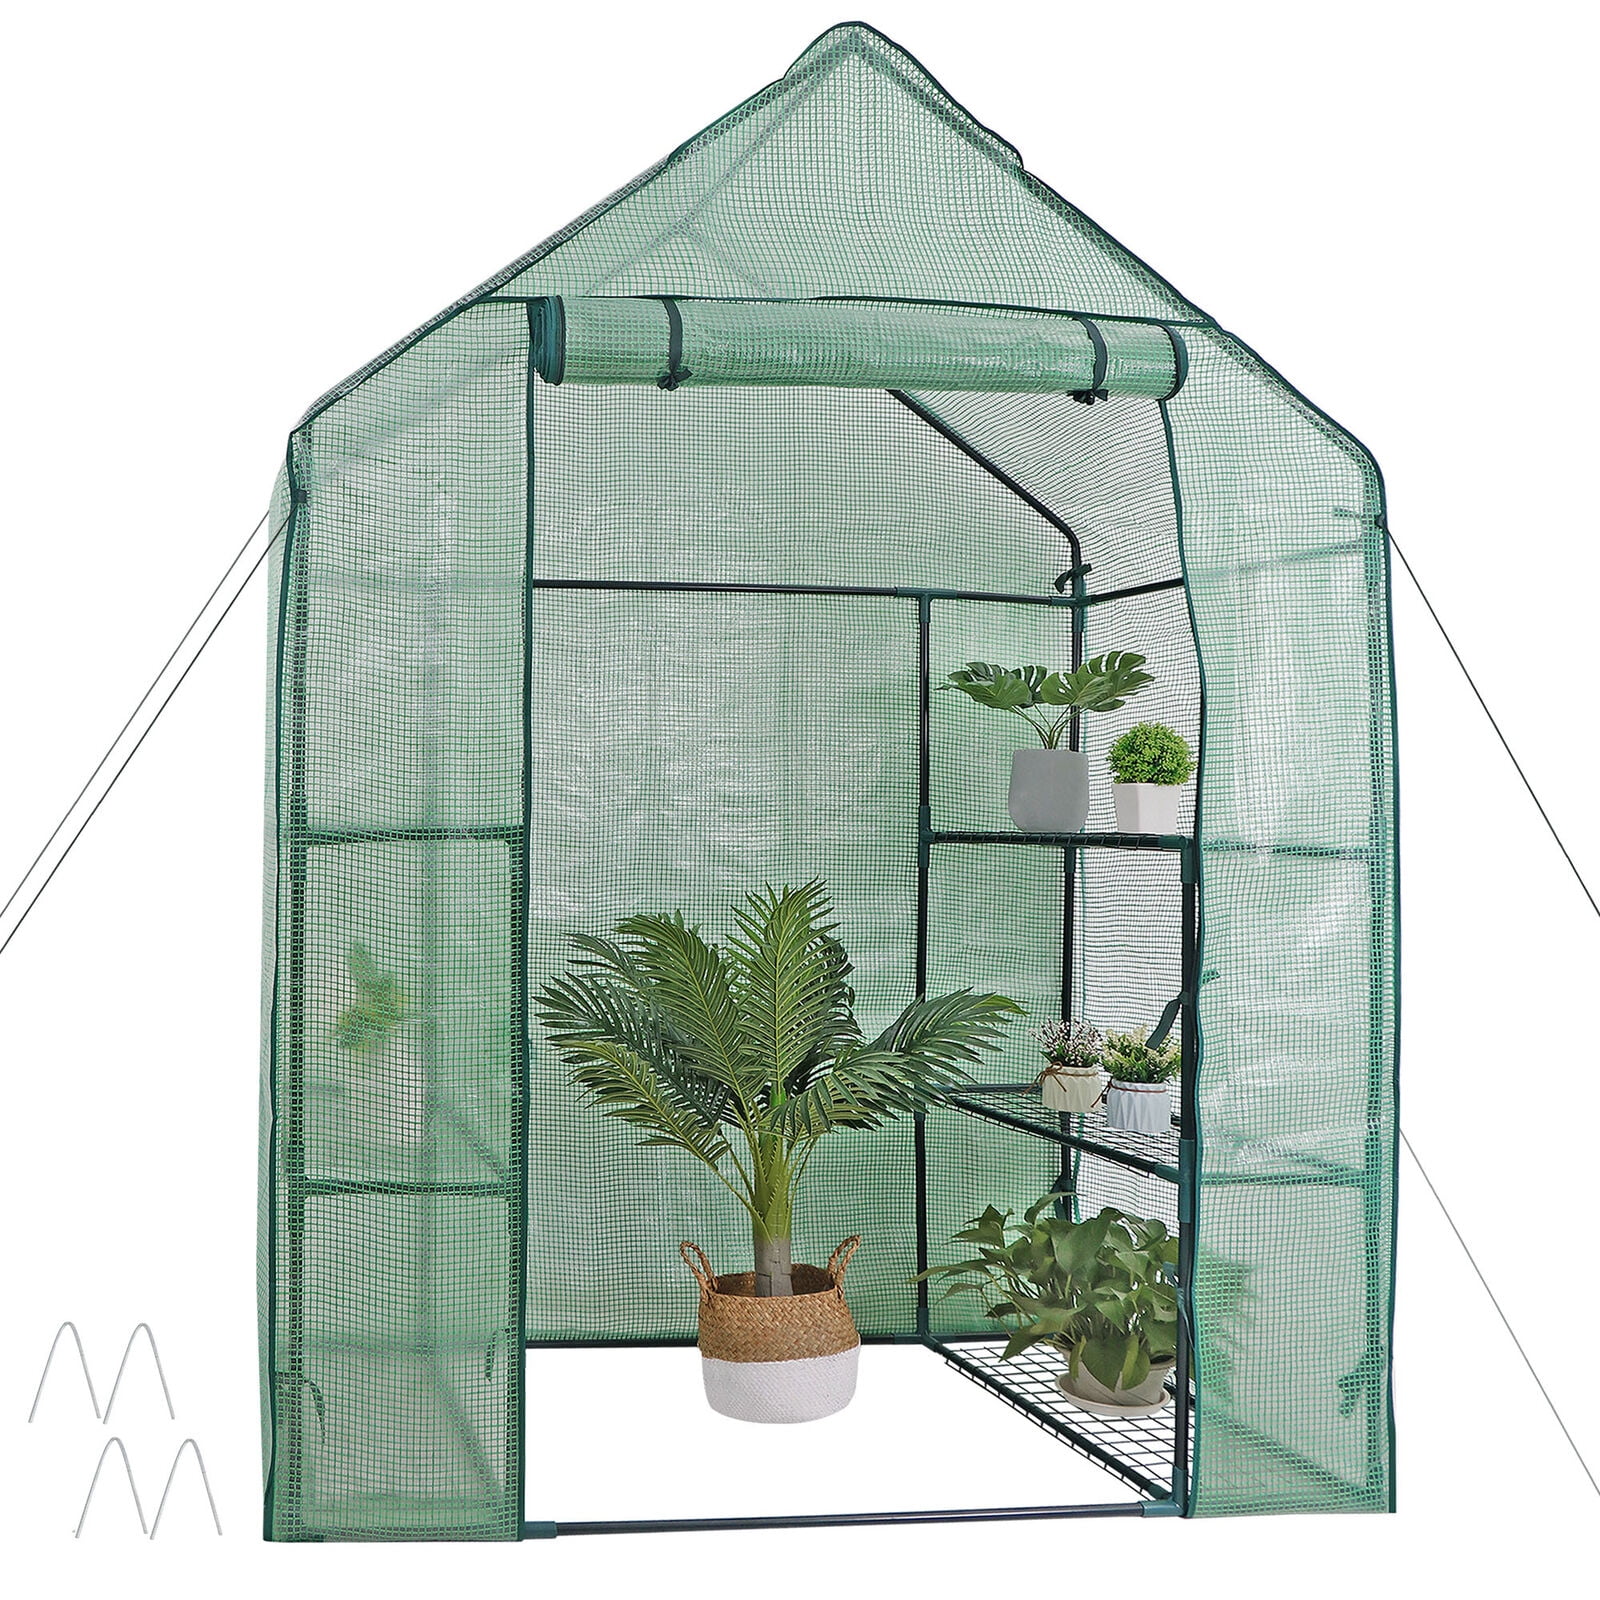 SONGMICS Garden Greenhouse Backyard 143 x 215 x 195 cm Grow House for Outdoors Roll-up Door Walk-in Plant Shed with 14 Shelves Patio Green GWP13GN Terrace